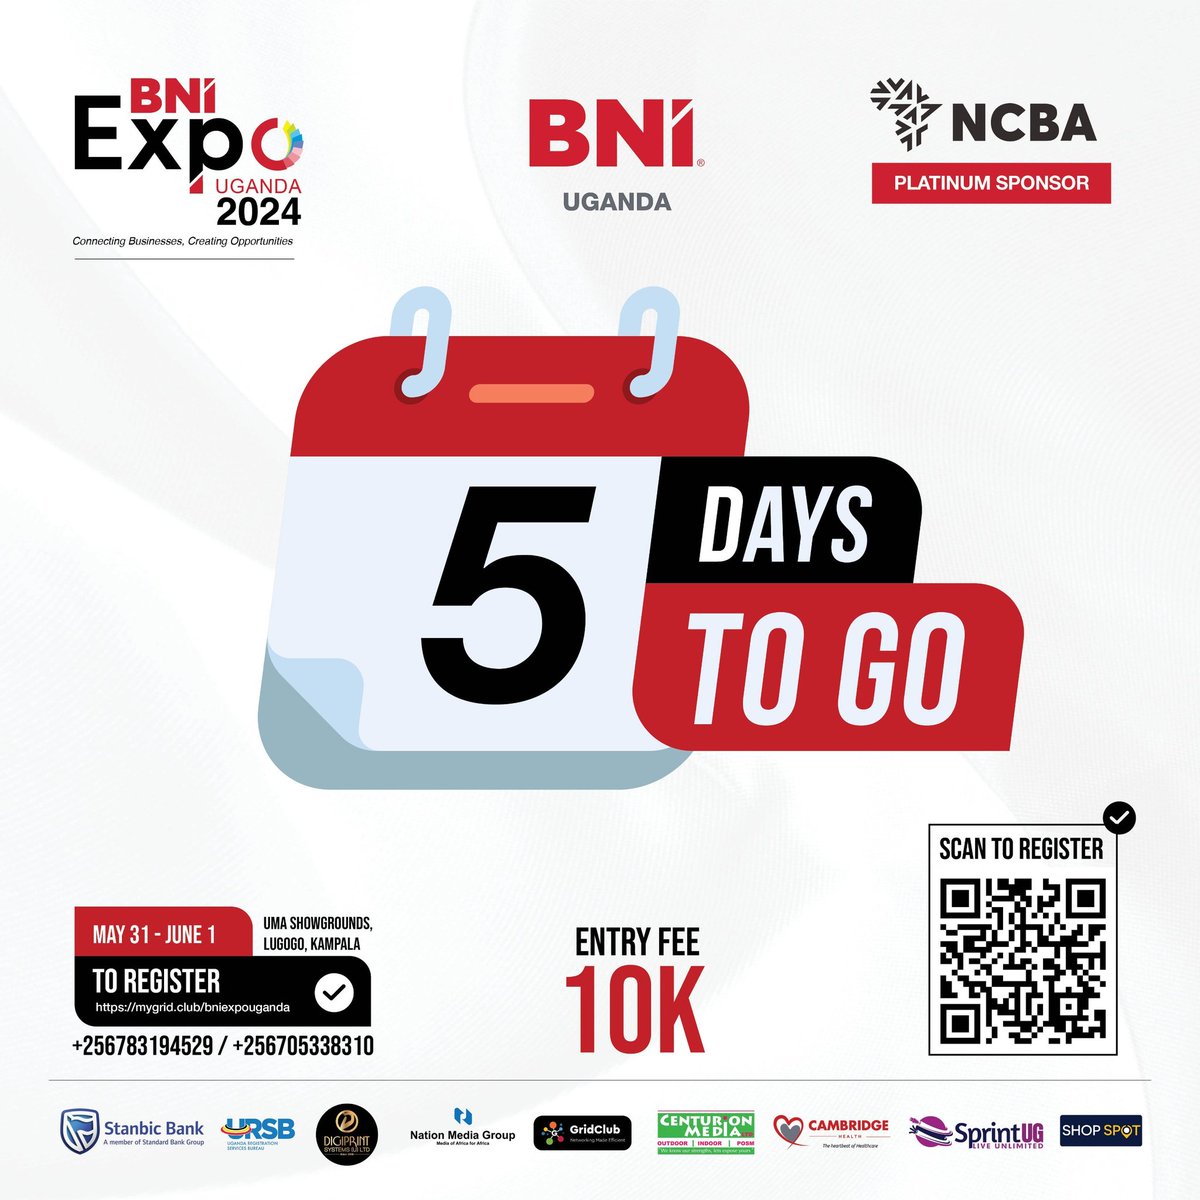 Count with me, 5 more days 🖐🏽 The #BNIExpo2024 is getting closer by the day, and I'm glad we get to experience twice! Let's connect 🤗